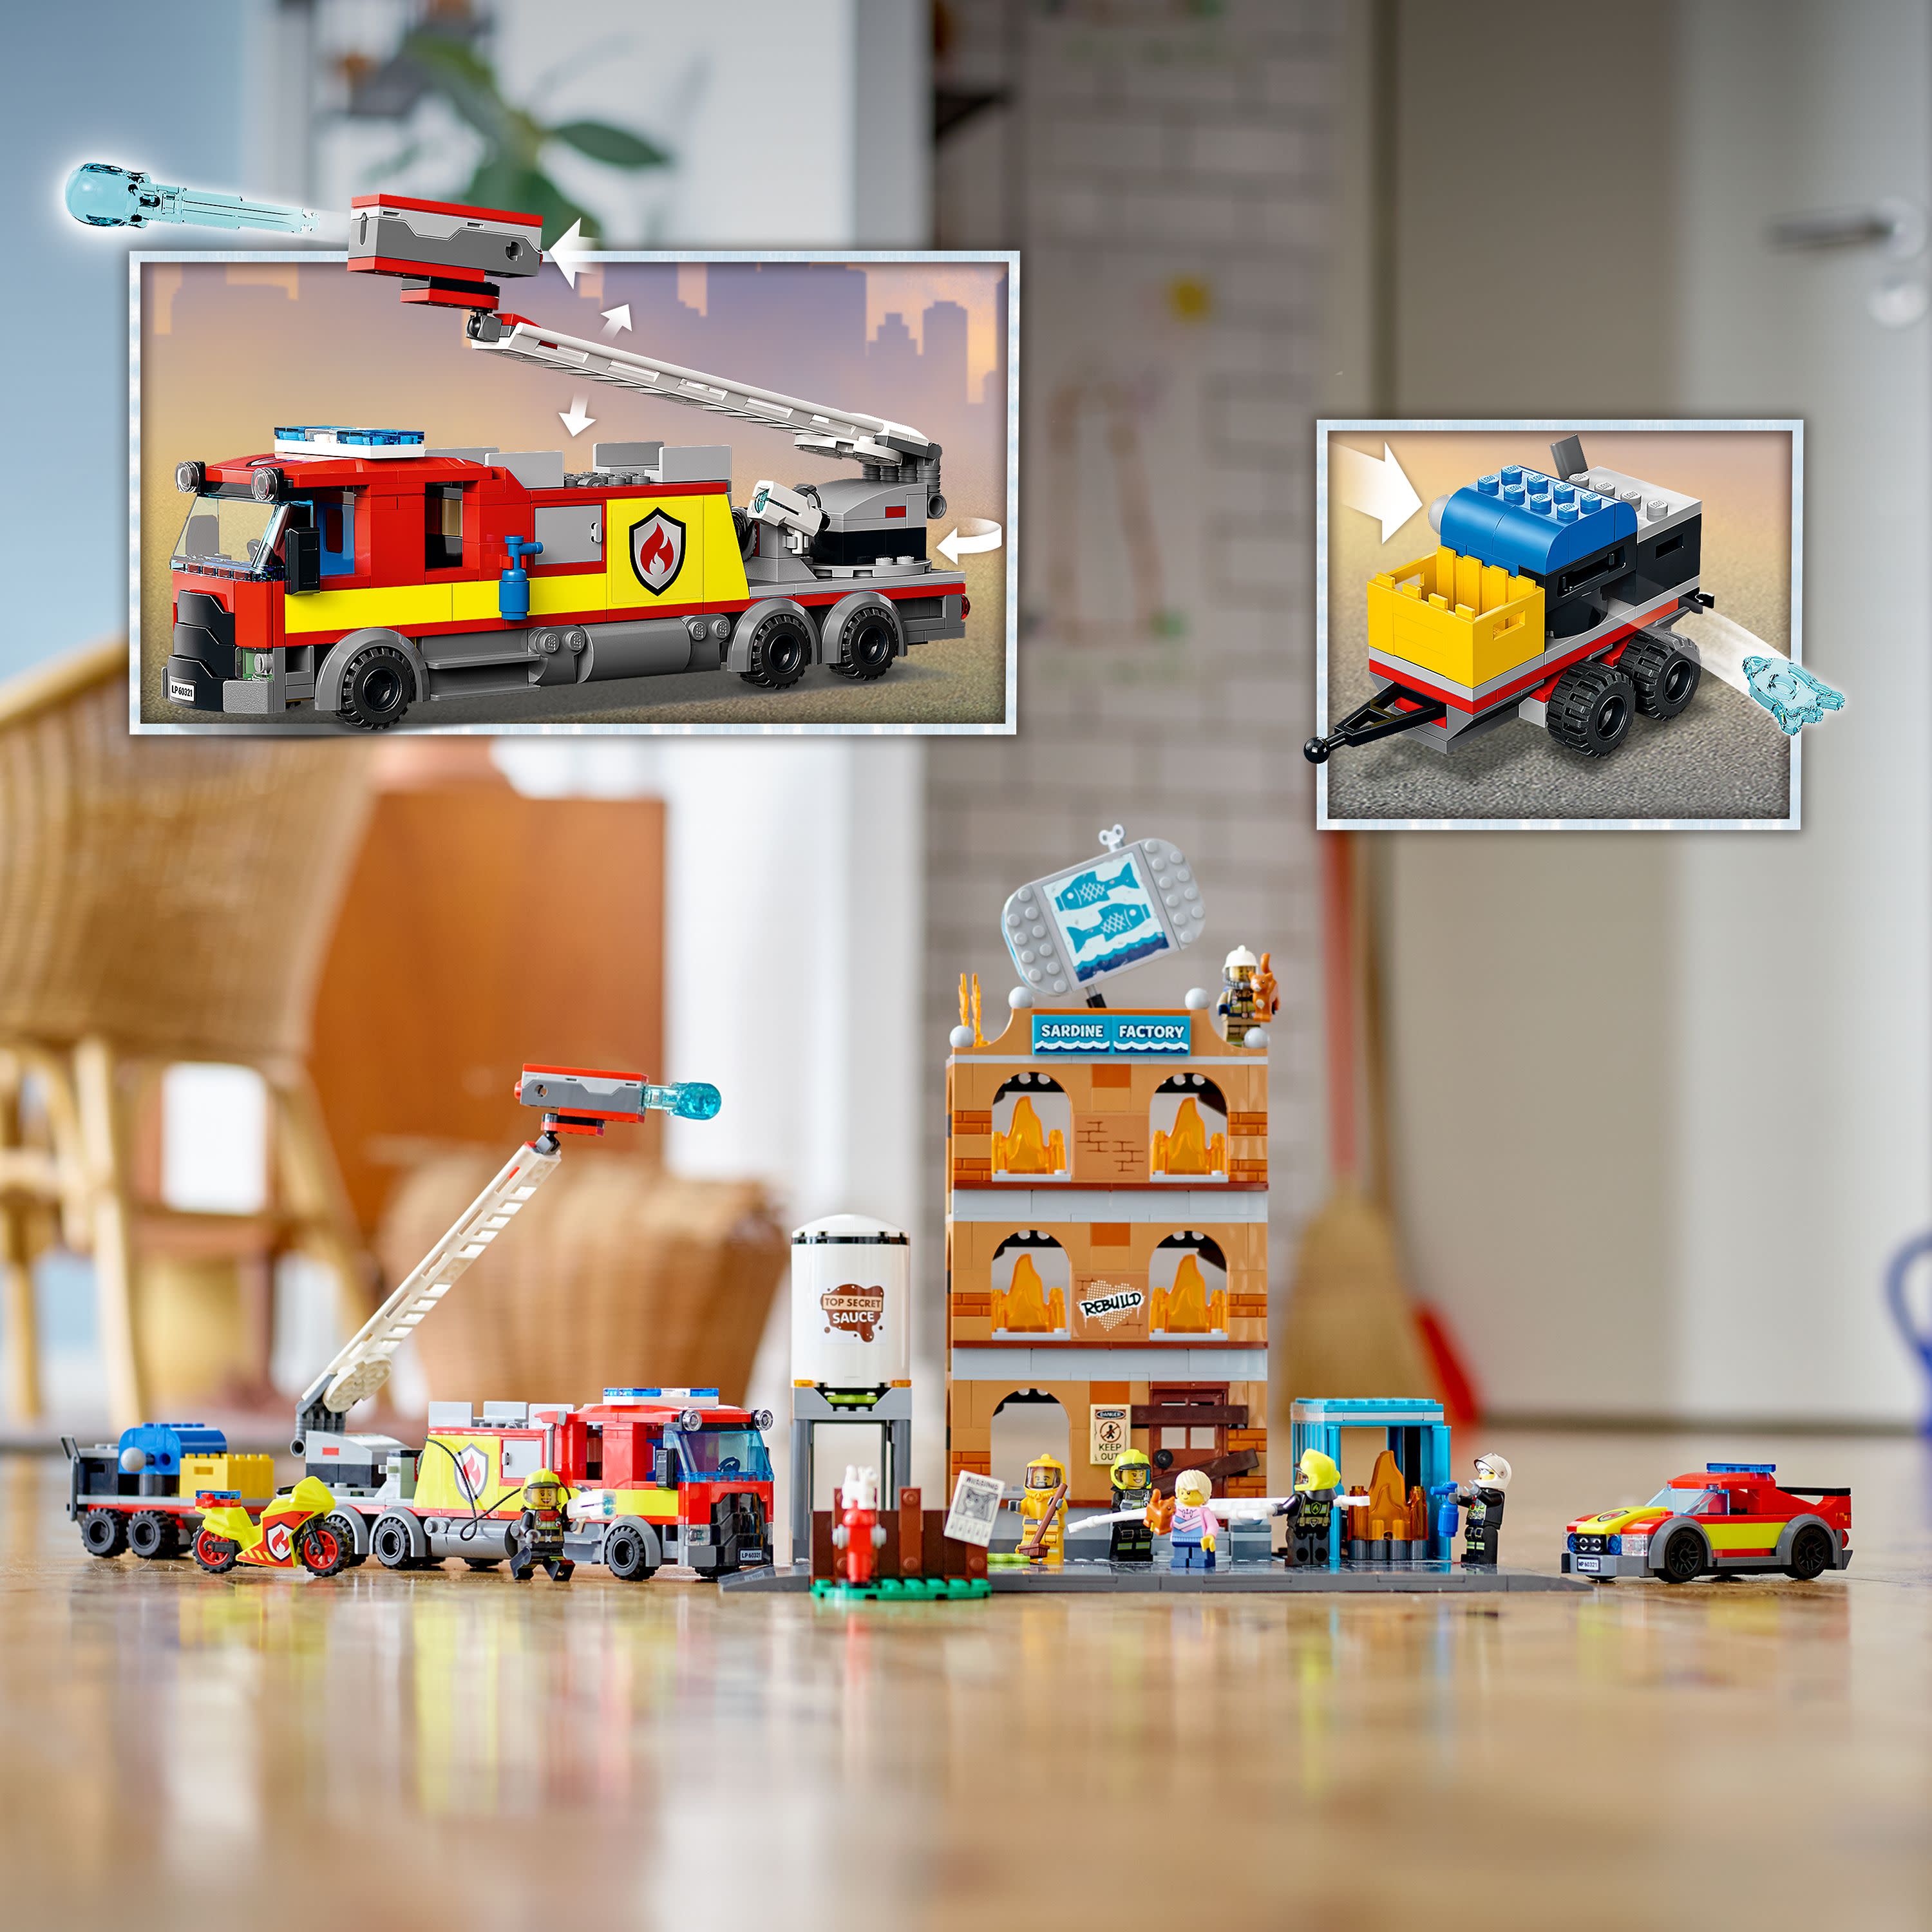 LEGO City Fire Brigade 60321 Building Set with Toy Fire Truck and Five Minifigures. Pretend Play Fire Engine Toy for Kids, Boys, and Girls Ages 7+ - image 5 of 8